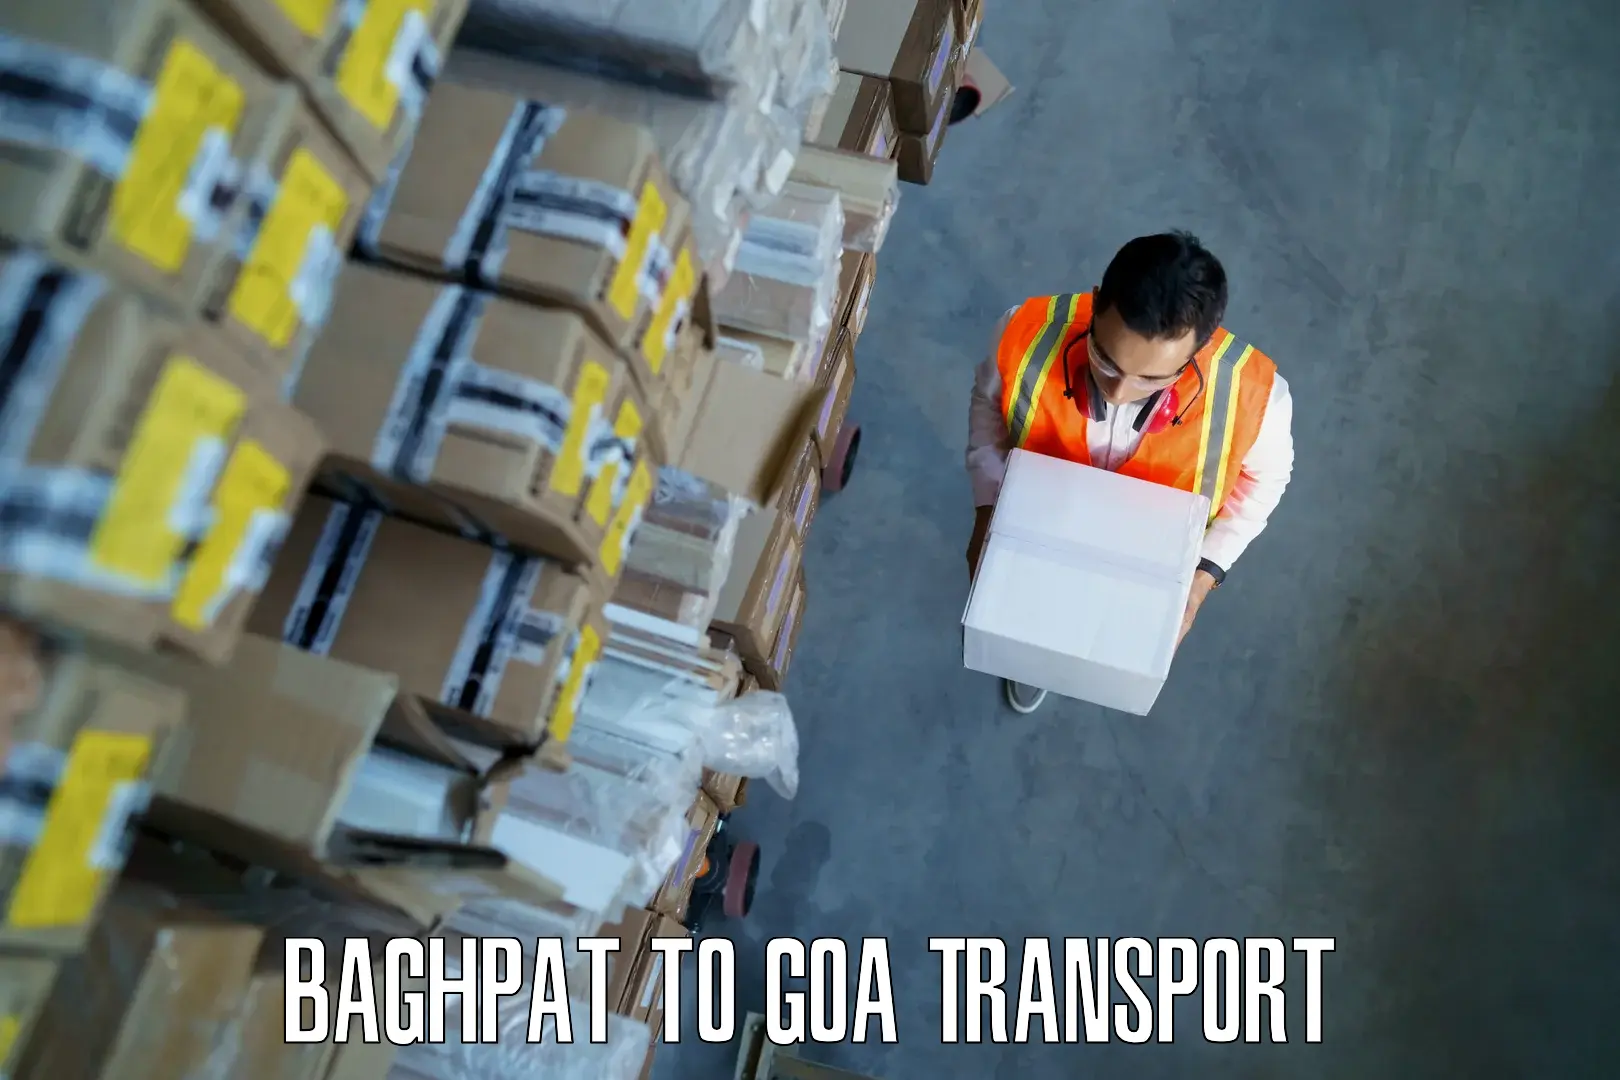 Goods delivery service Baghpat to South Goa